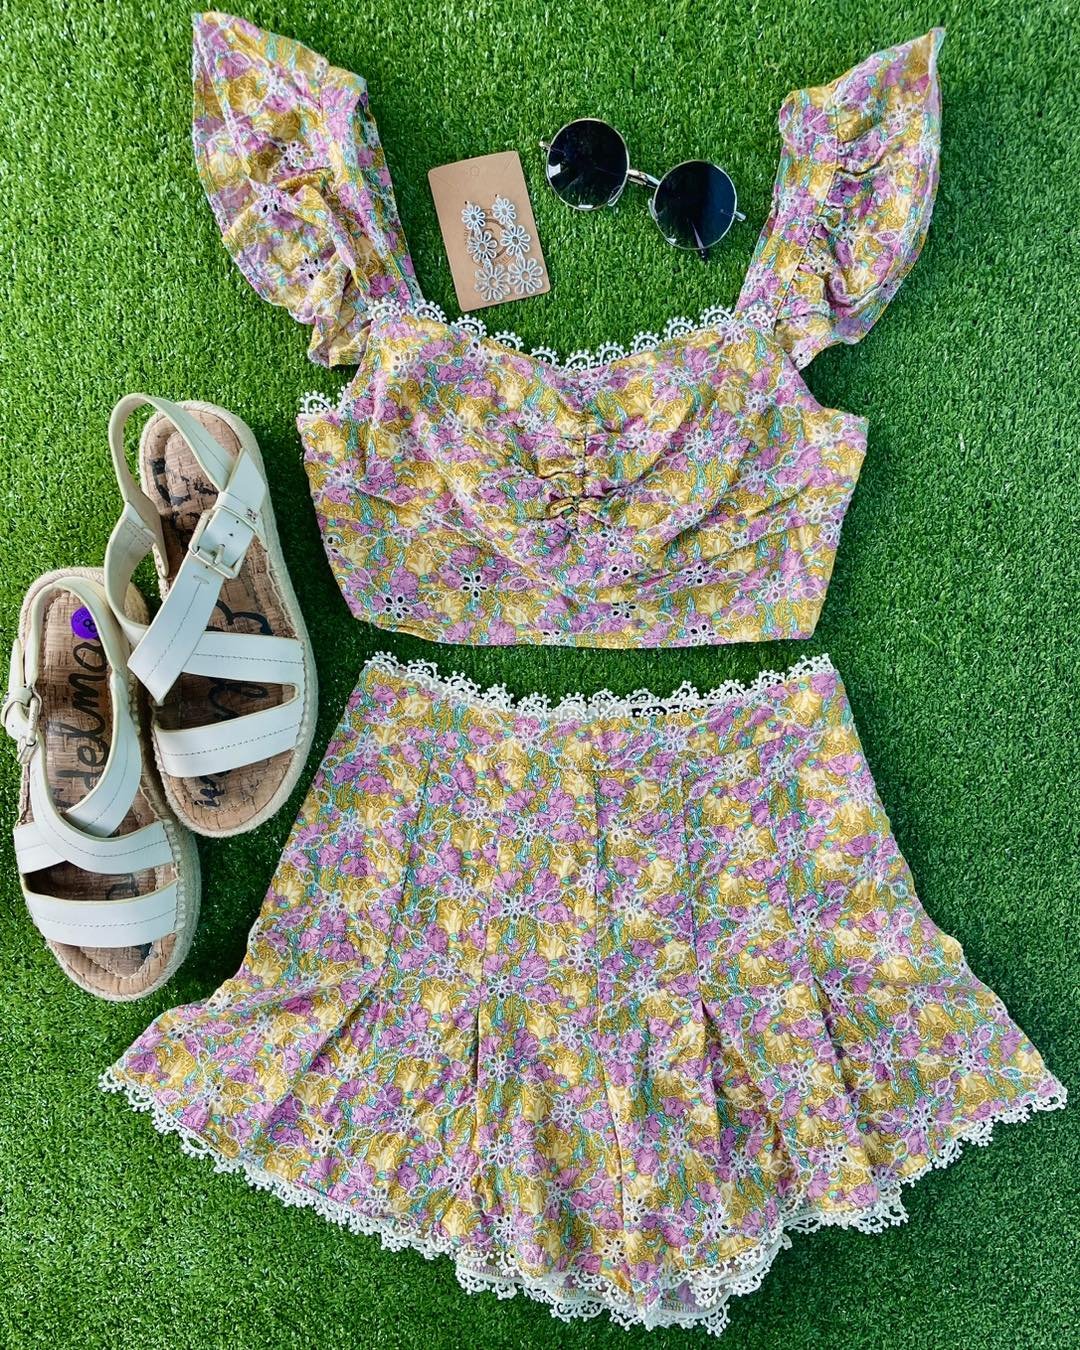 How cute is this two piece set from Lulus!?🤩

Add it to your summer wardrobe today! We&rsquo;re open from 10-6!!
&bull;
&bull;
&bull;
Set: small, $15.49
Shoes: 8, $17.49